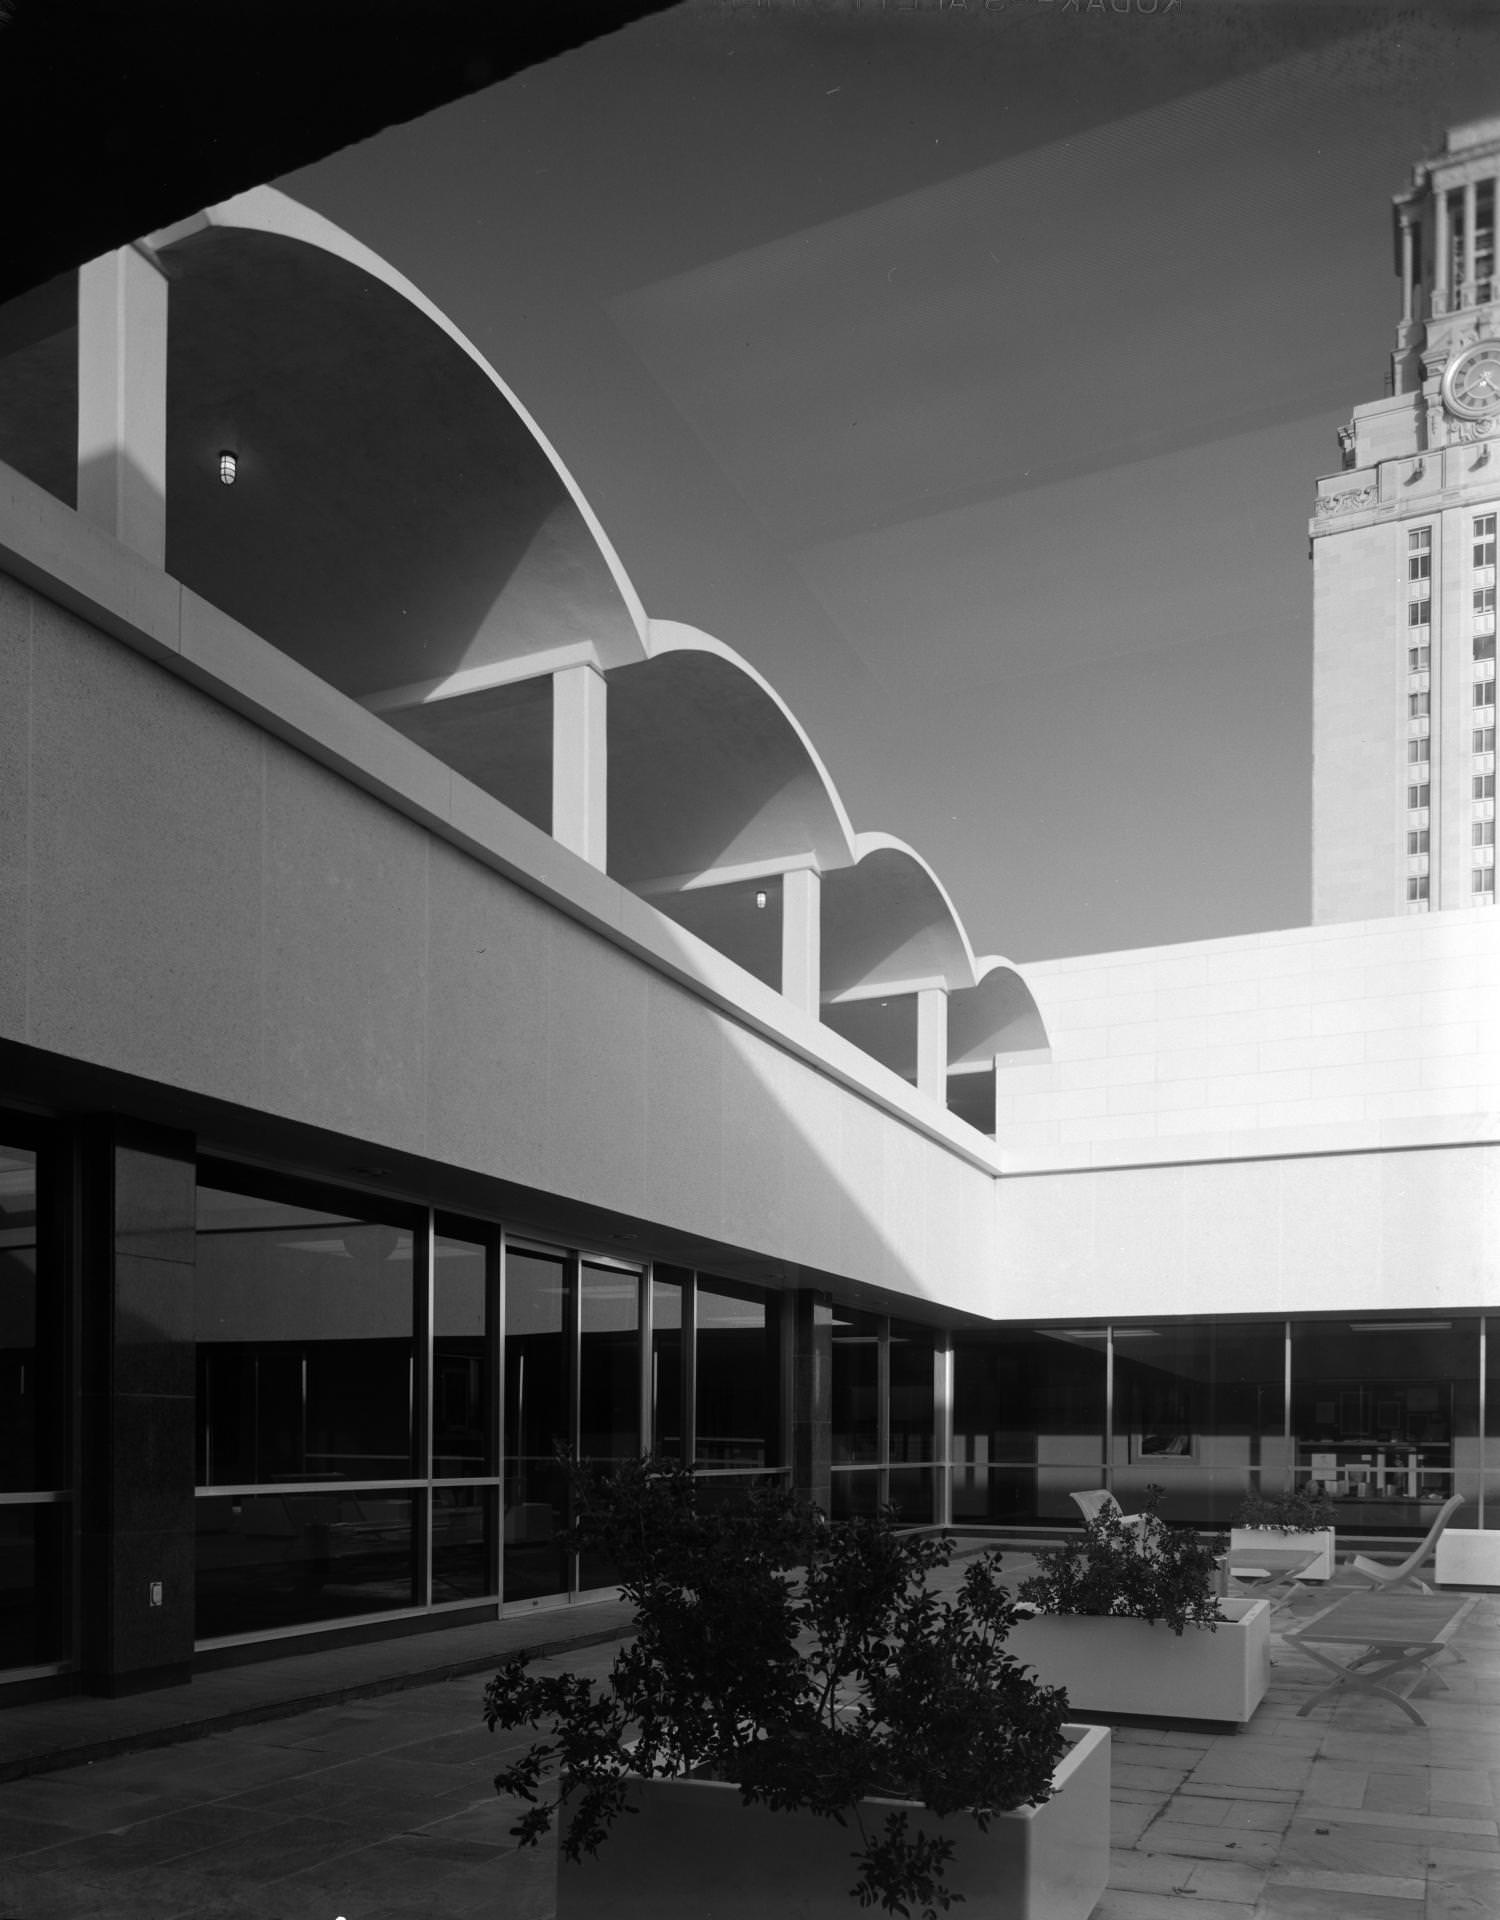 The roof courtyard of the Peter T. Flawn Academic Center. The UT Tower is visible on the right side, 1964